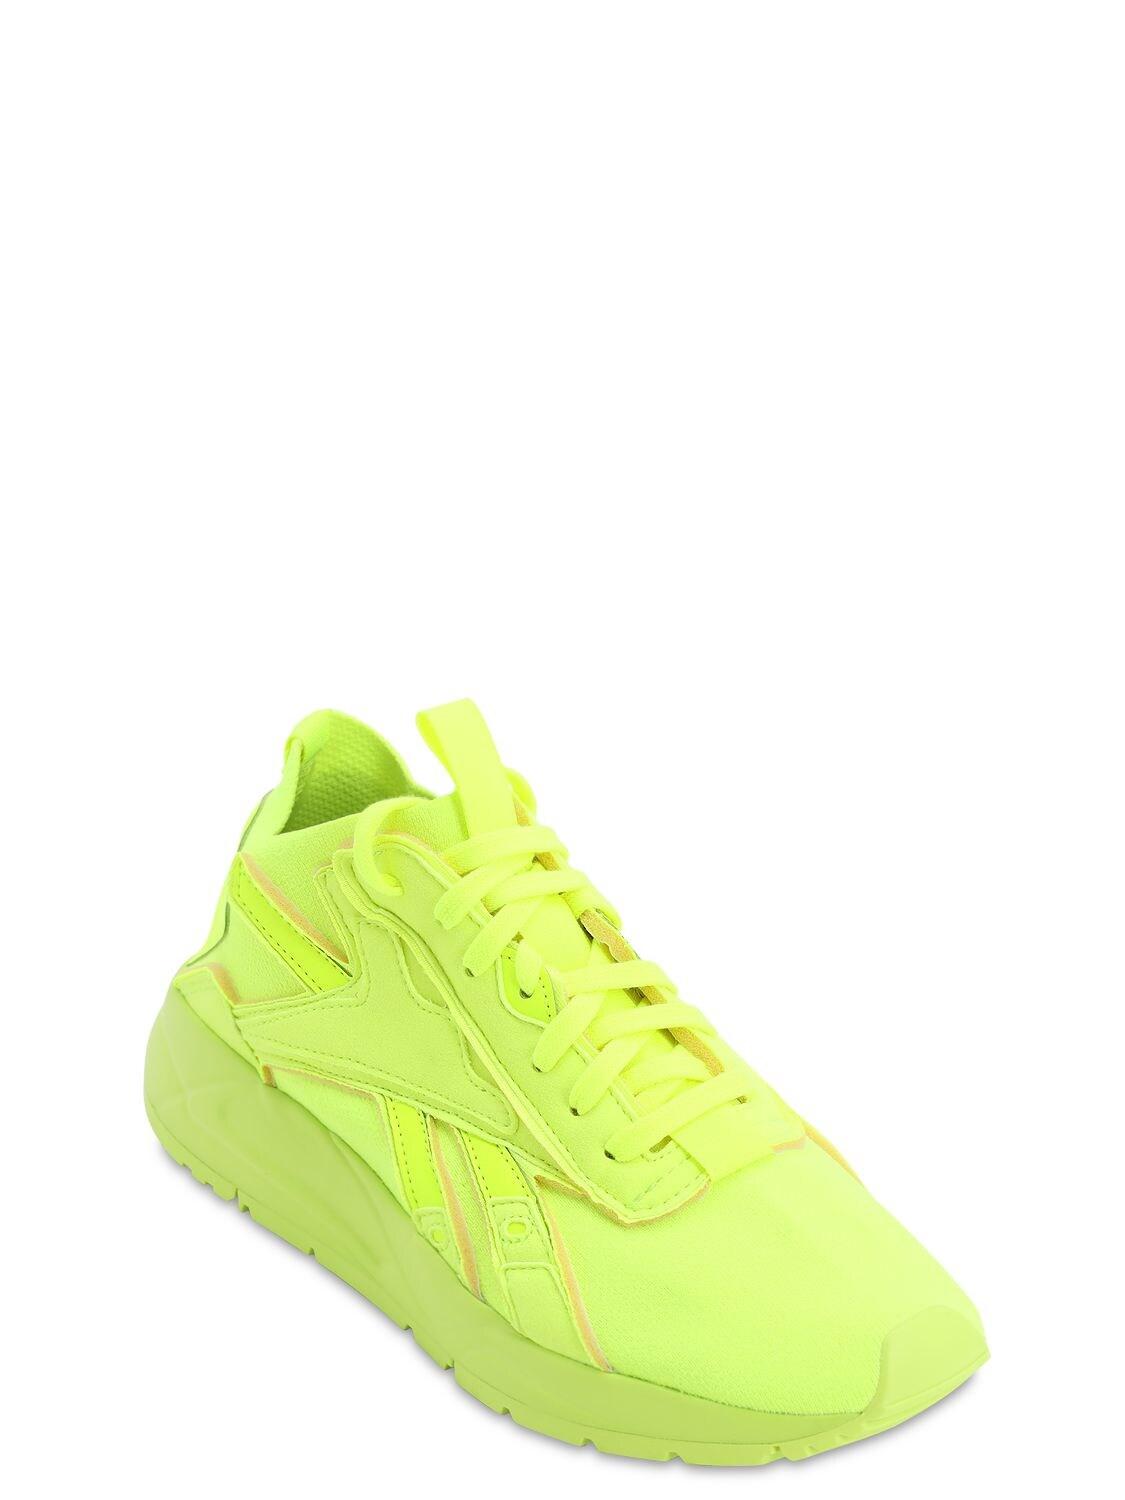 victoria beckham bolton low trainers